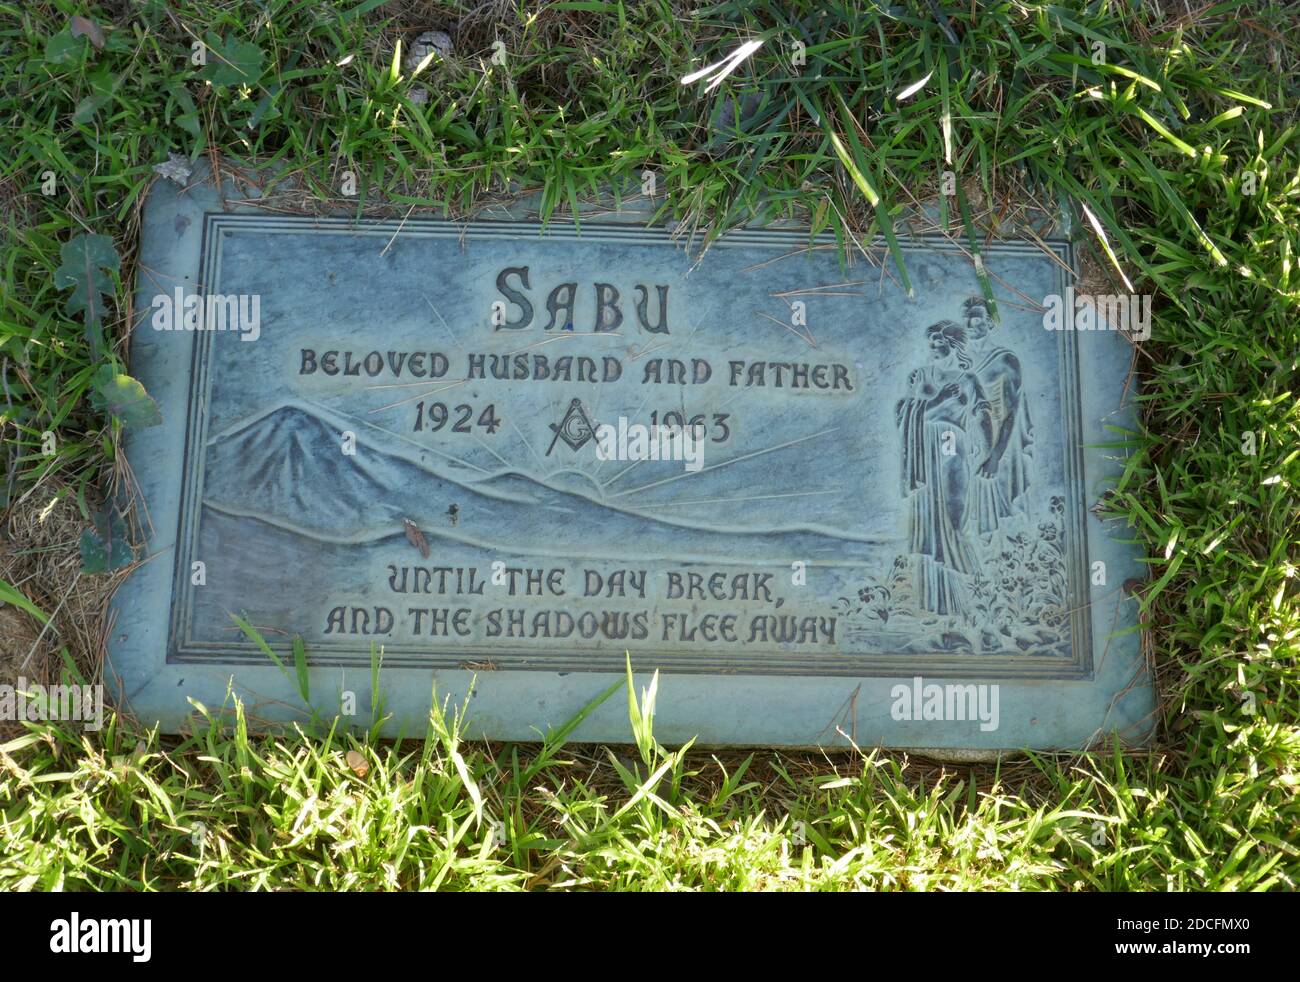 Los Angeles, California, USA 19th November 2020 A general view of atmosphere Sabu Dastagir's Grave at Forest Lawn Memorial Park Hollywood Hills on November 19, 2020 in Los Angeles, California, USA. Photo by Barry King/Alamy Stock Photo Stock Photo